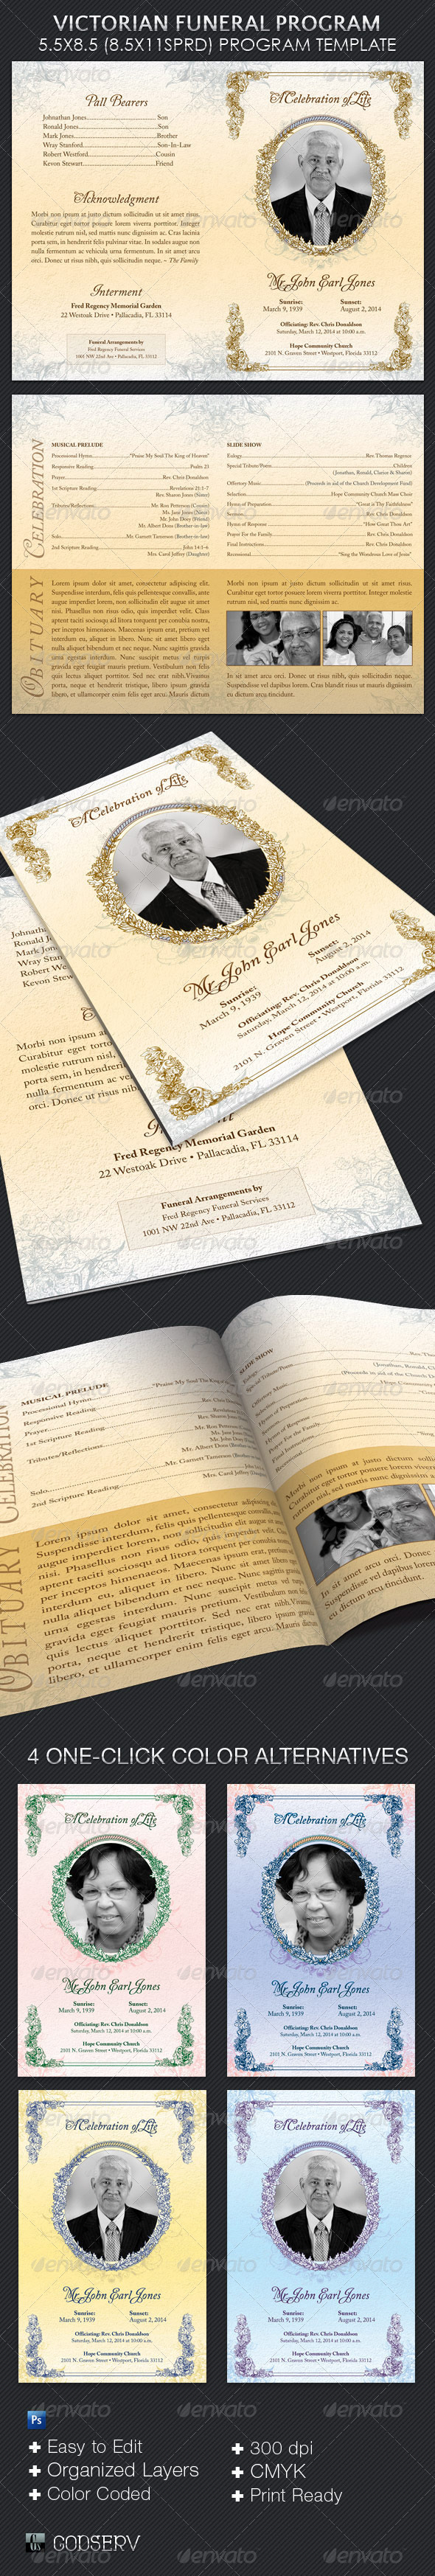 Free Funeral Program Template Download 2010 from previews.customer.envatousercontent.com